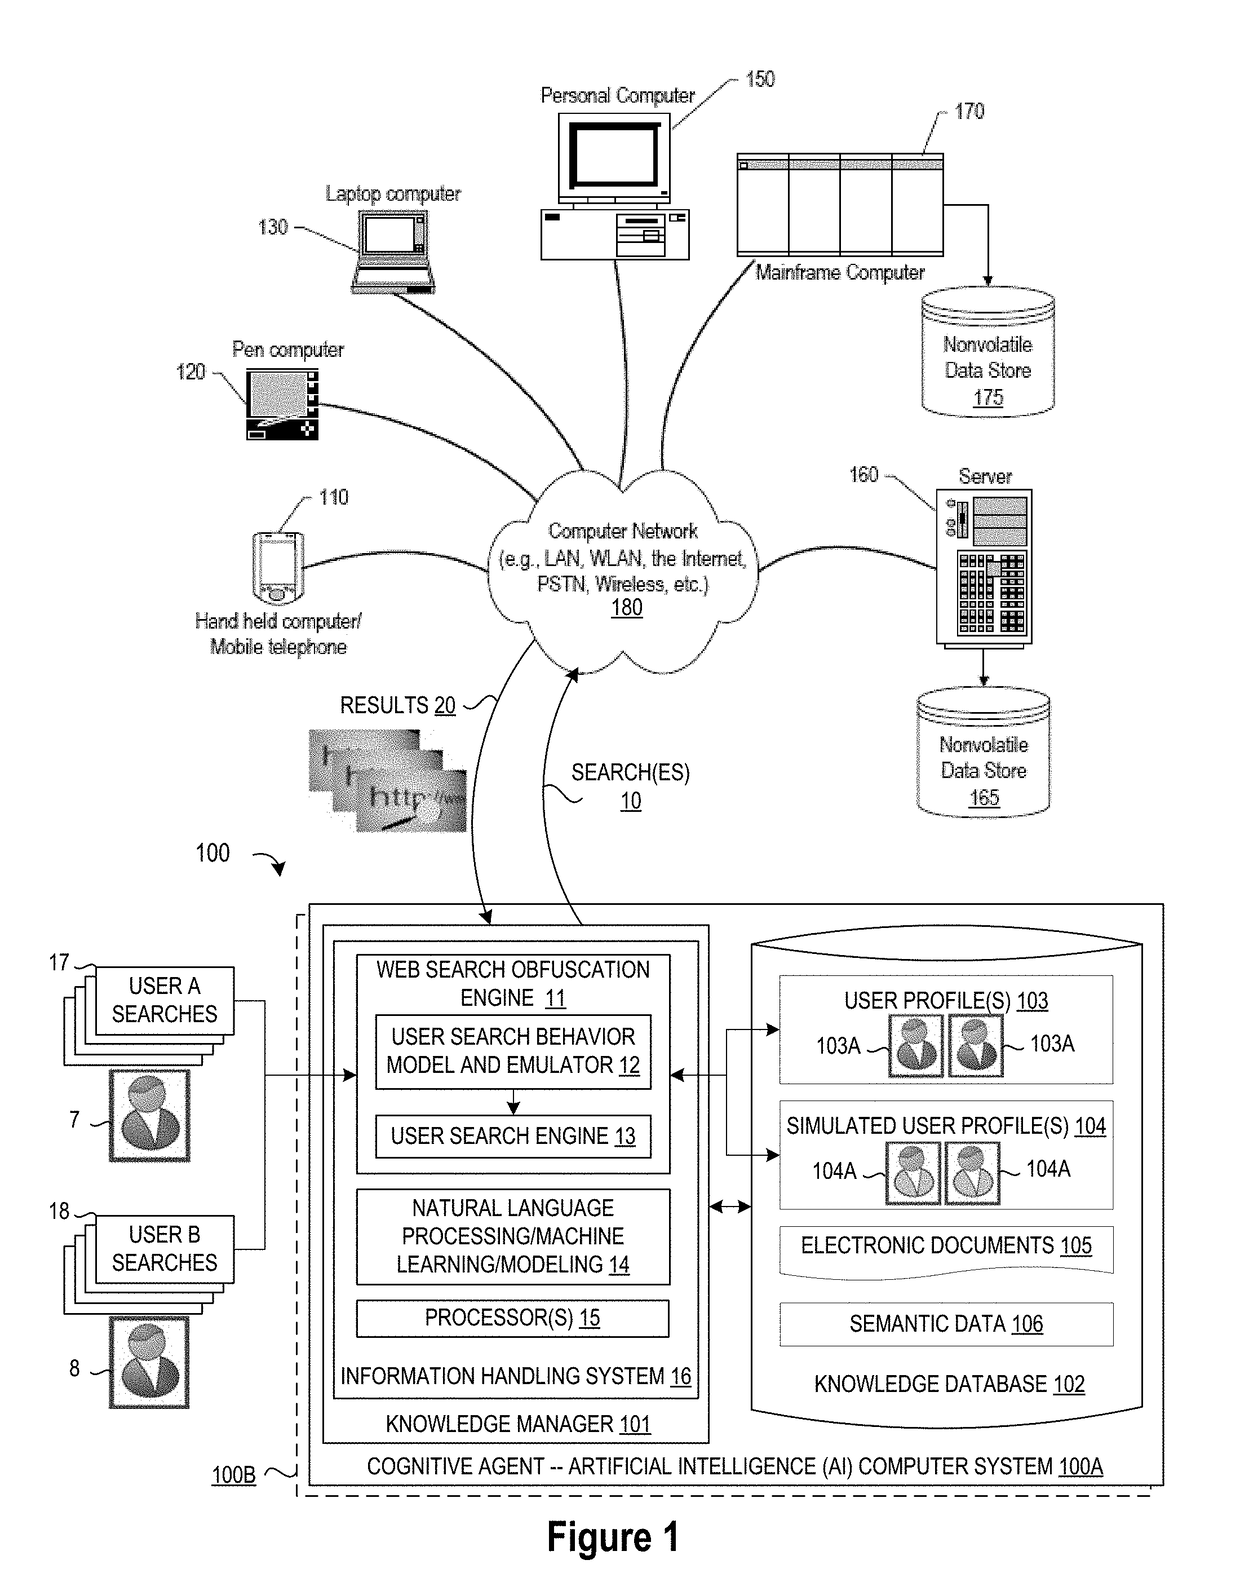 System and Method for Cognitive Agent-Based Web Search Obfuscation